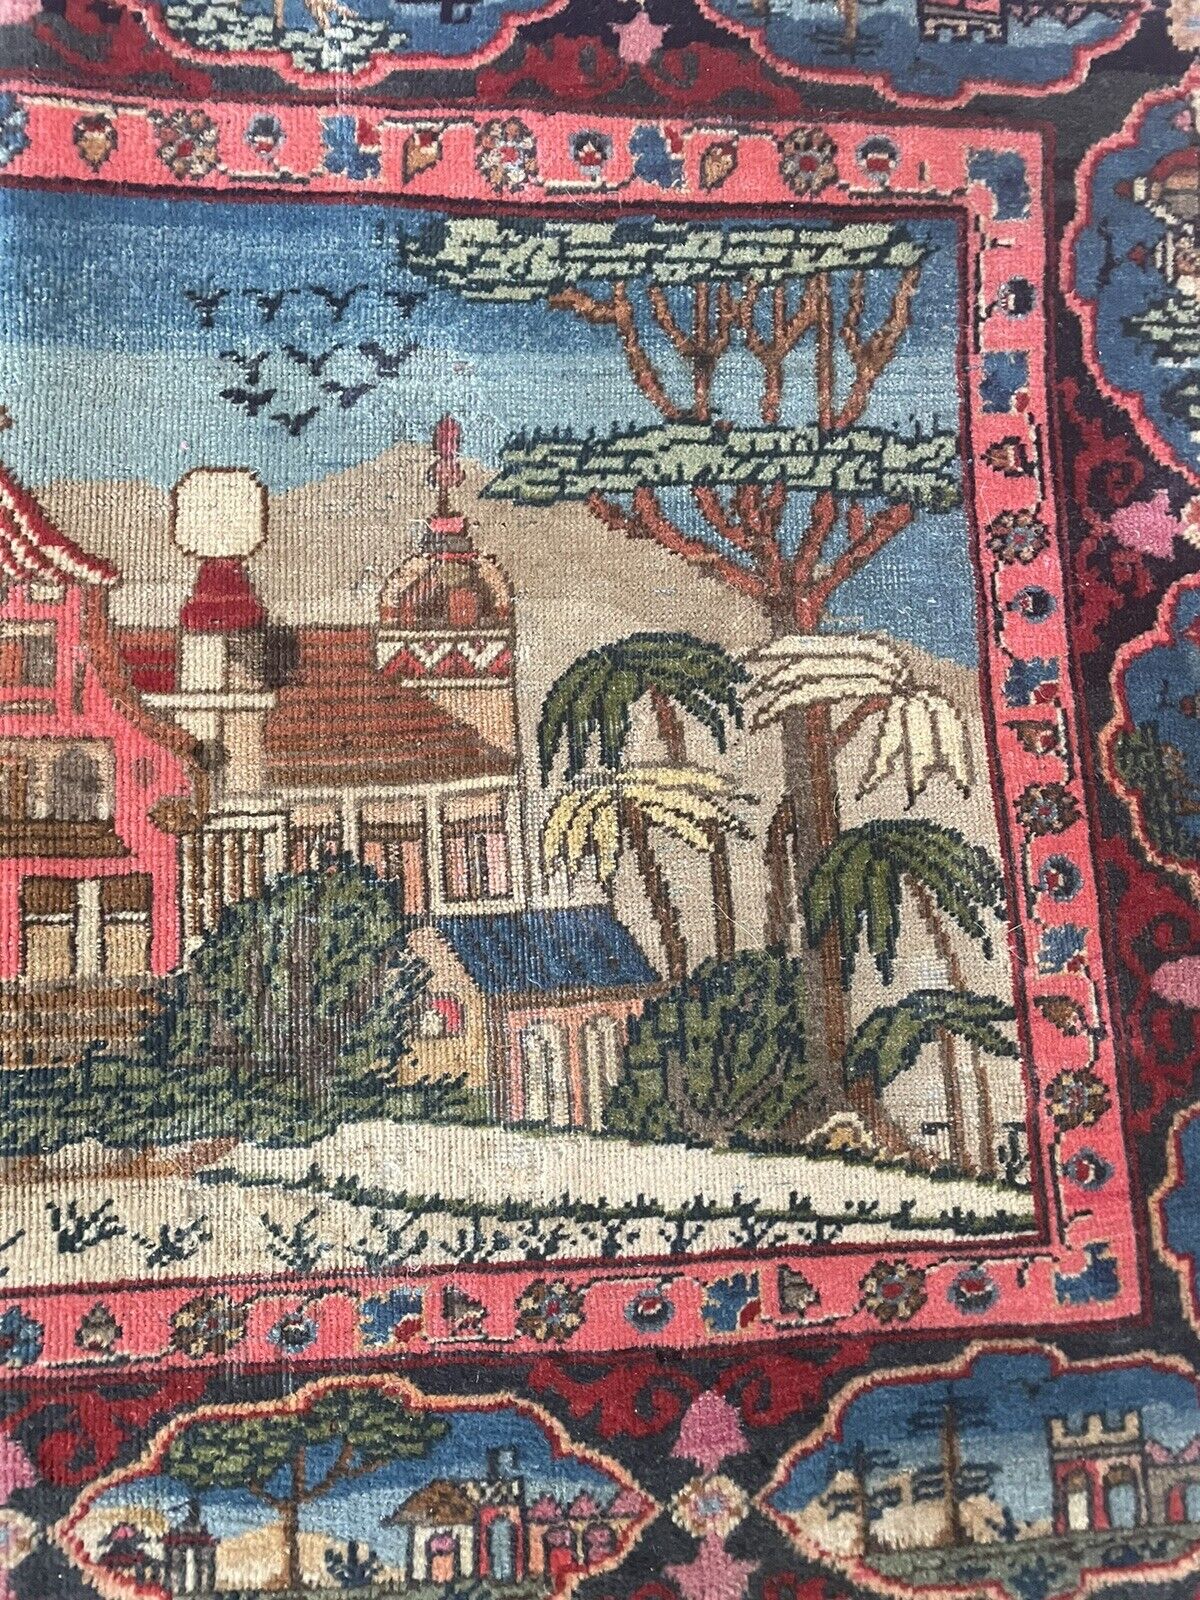 Close-up of craftsmanship on Handmade Antique Persian Kashan Collectible Rug - Detailed view highlighting the meticulous weaving and skillful craftsmanship evident in the rug's design.